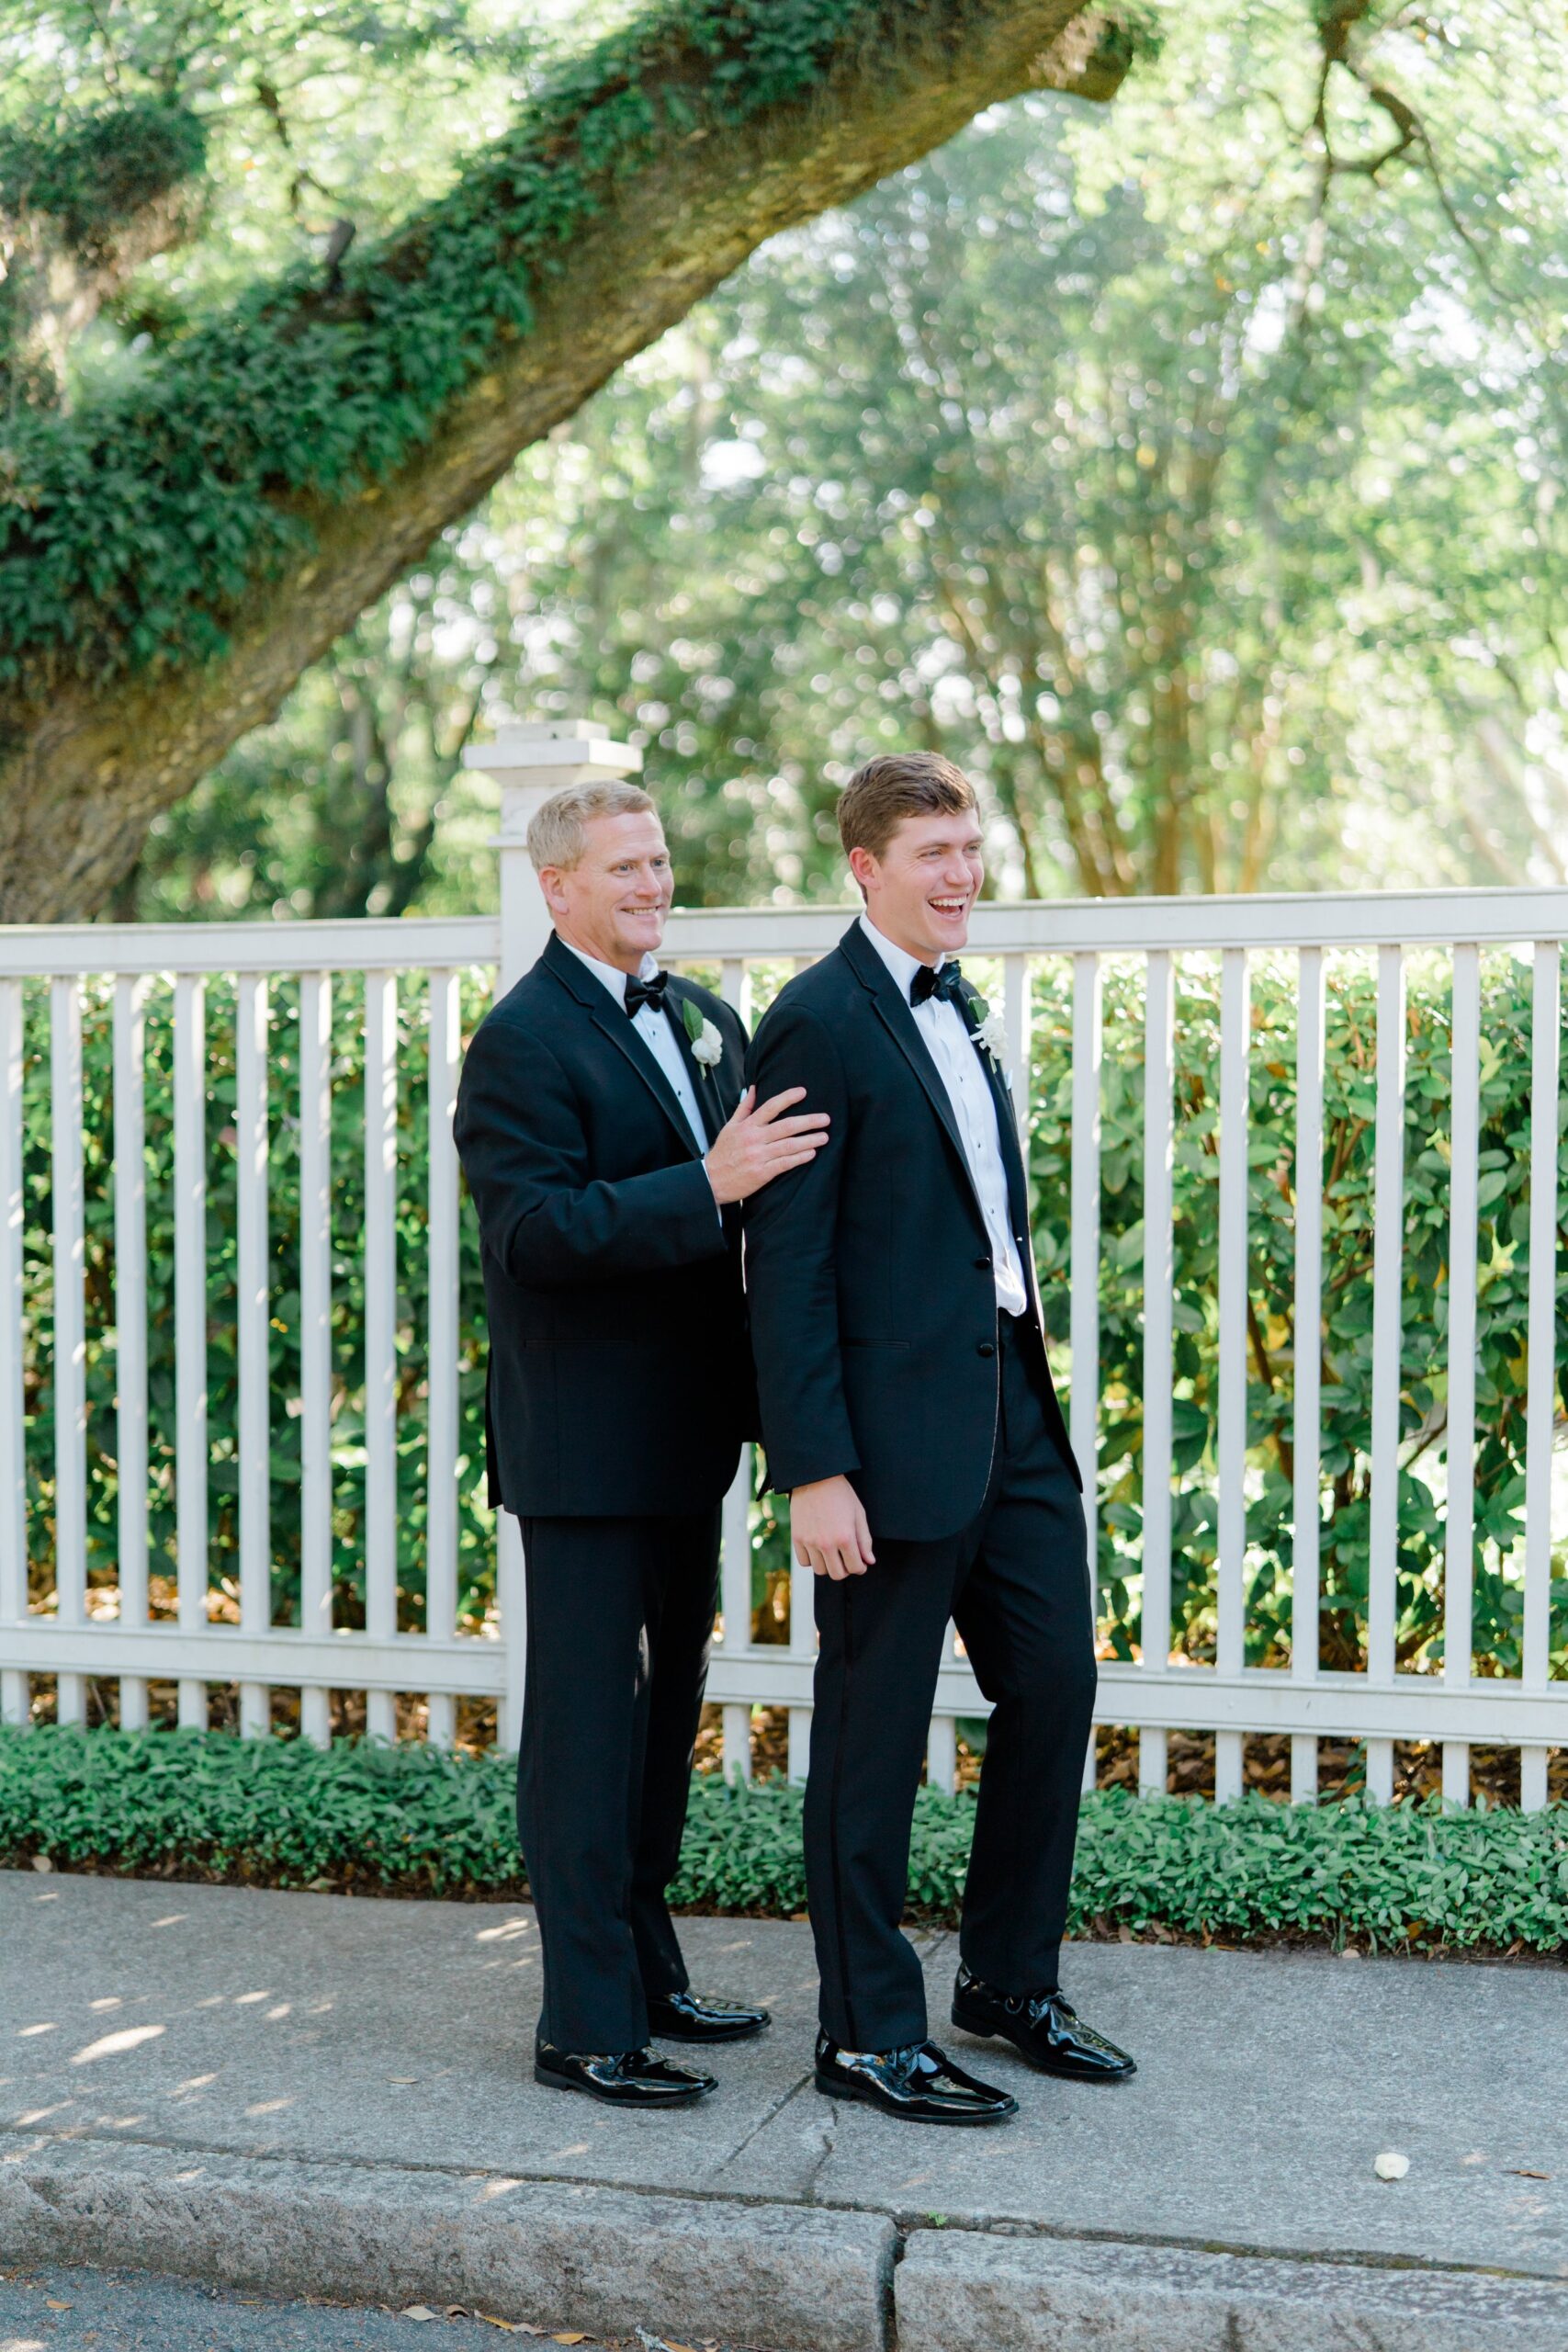 Groom with his dad at Governor Thomas Bennett house wedding. Standing on sidewalk with live oak and greenery.